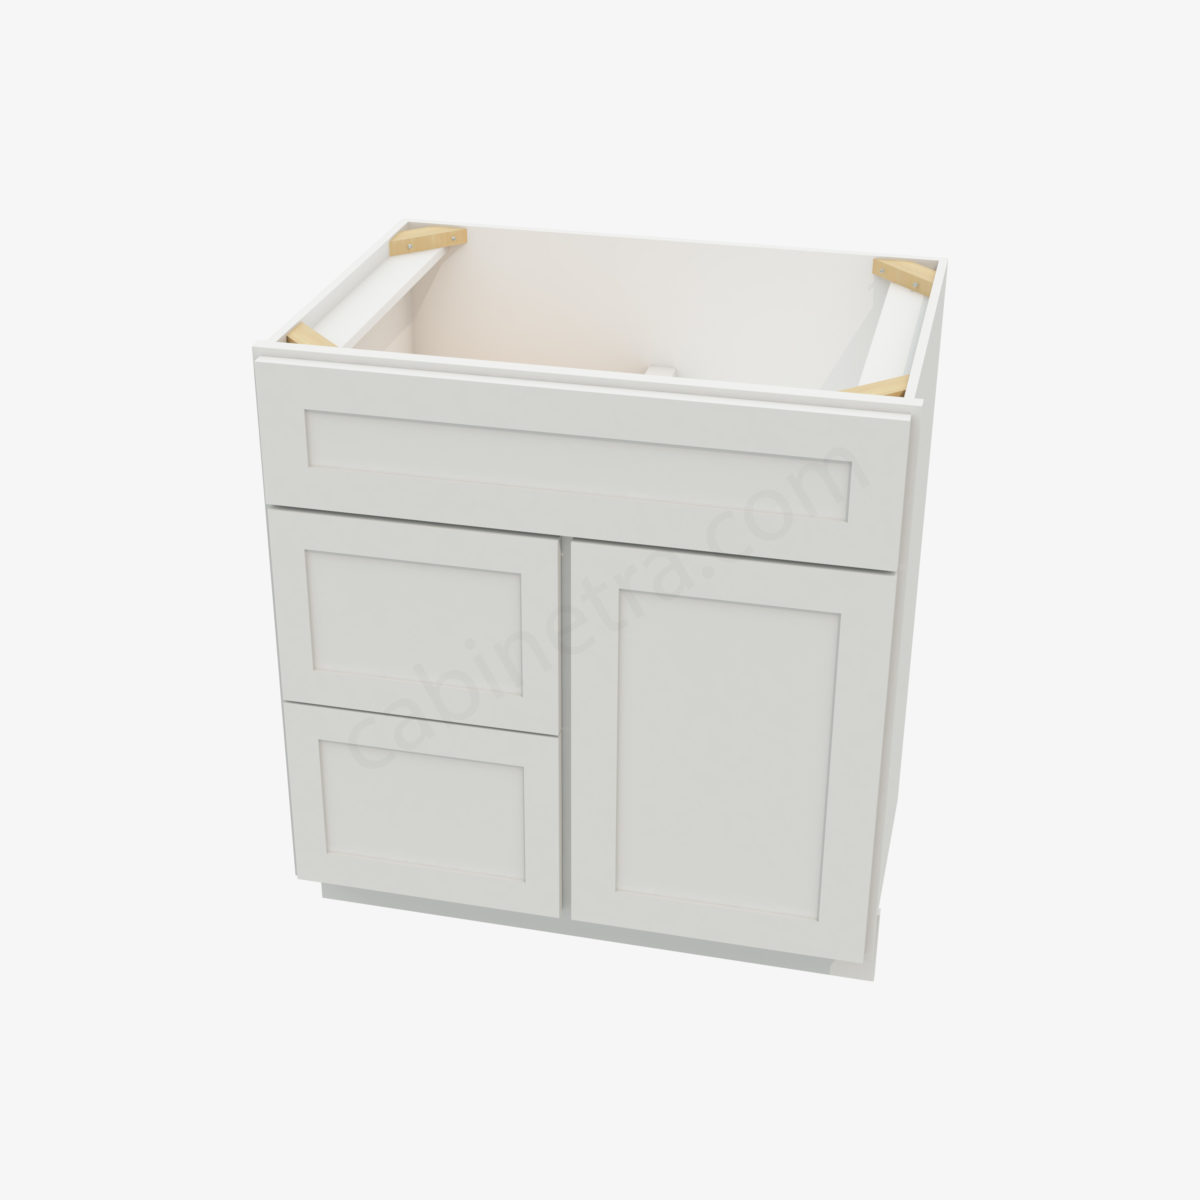 AW S3021DL 34 3 Forevermark Ice White Shaker Cabinetra scaled